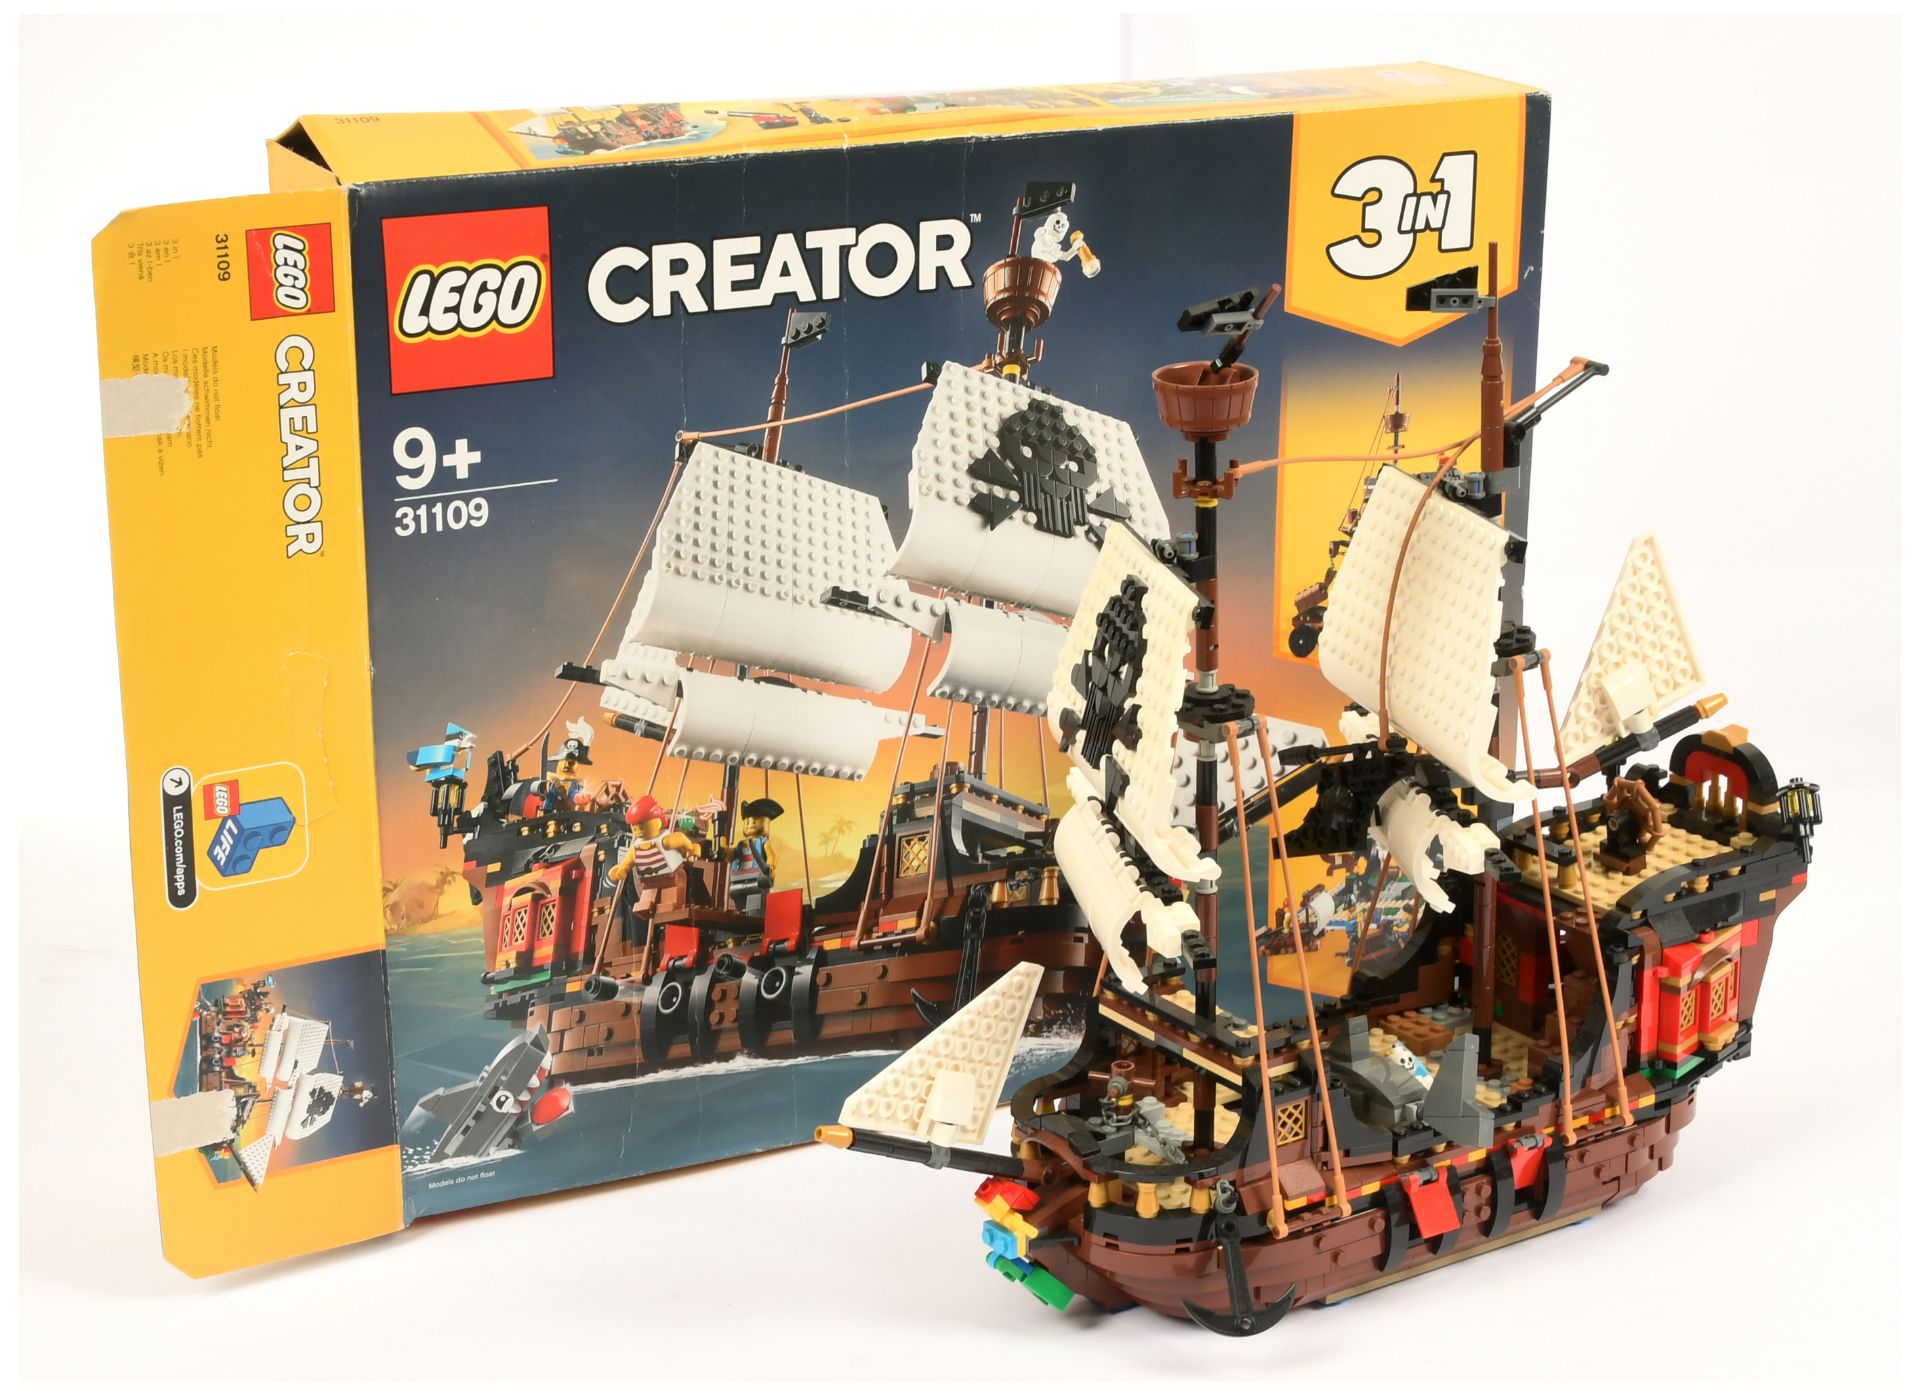 Lego 31109 Creator 3 in 1 Pirate Ship - Built model with instruction booklet, not checked for com...